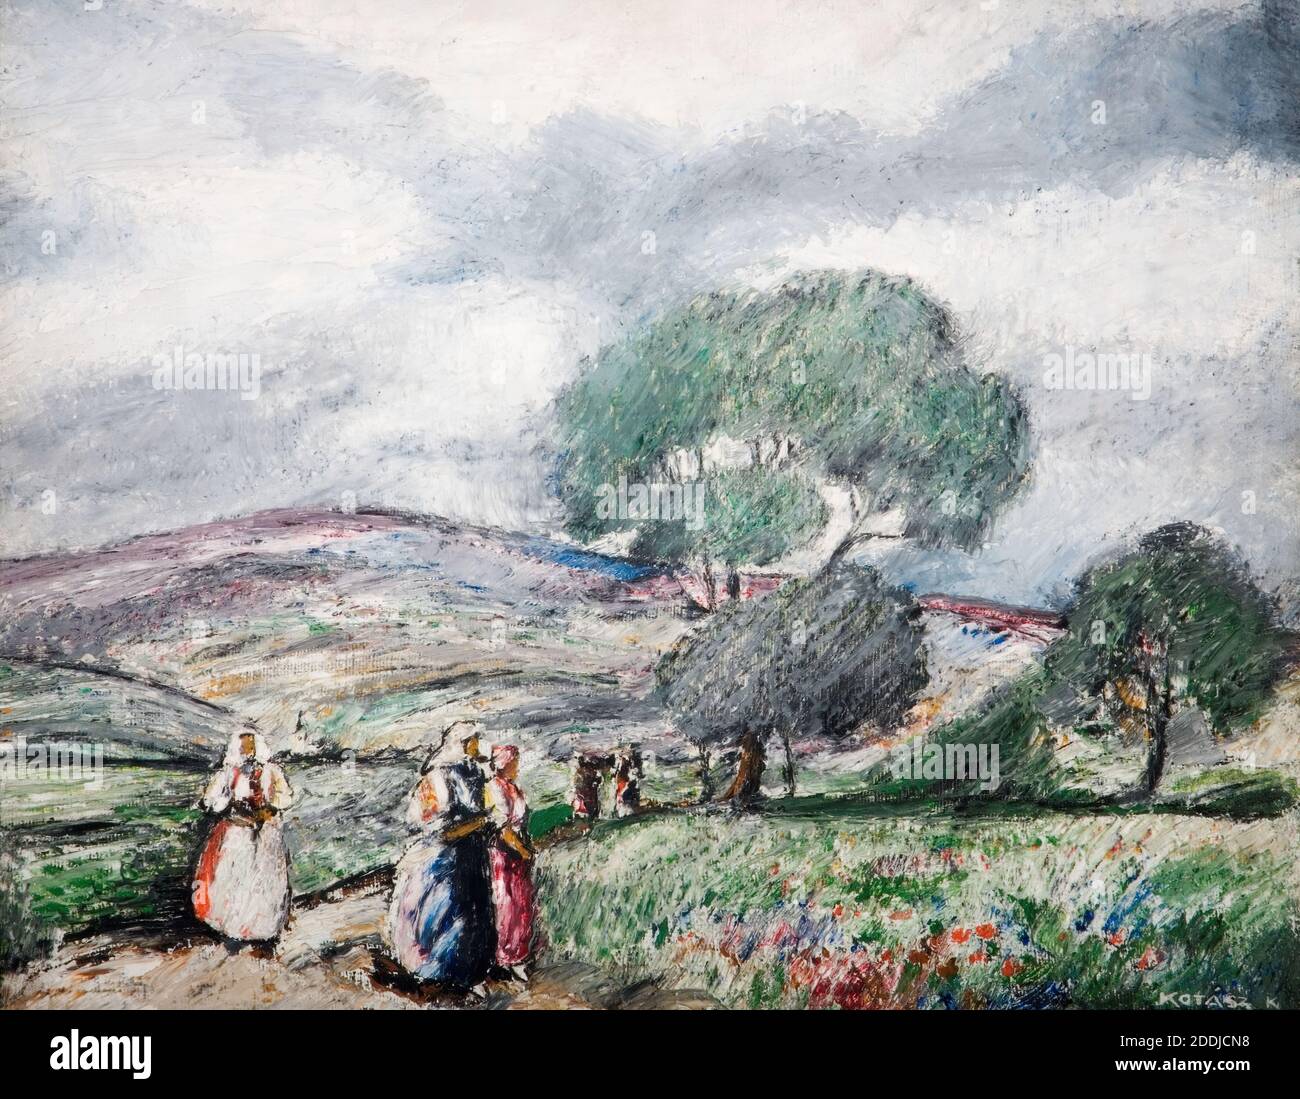 Stormy Landscape With Blue And Red Figures, 1940 By Karoly Kotasz (d.1941), Landscape, Women, Rural, Modernism Stock Photo